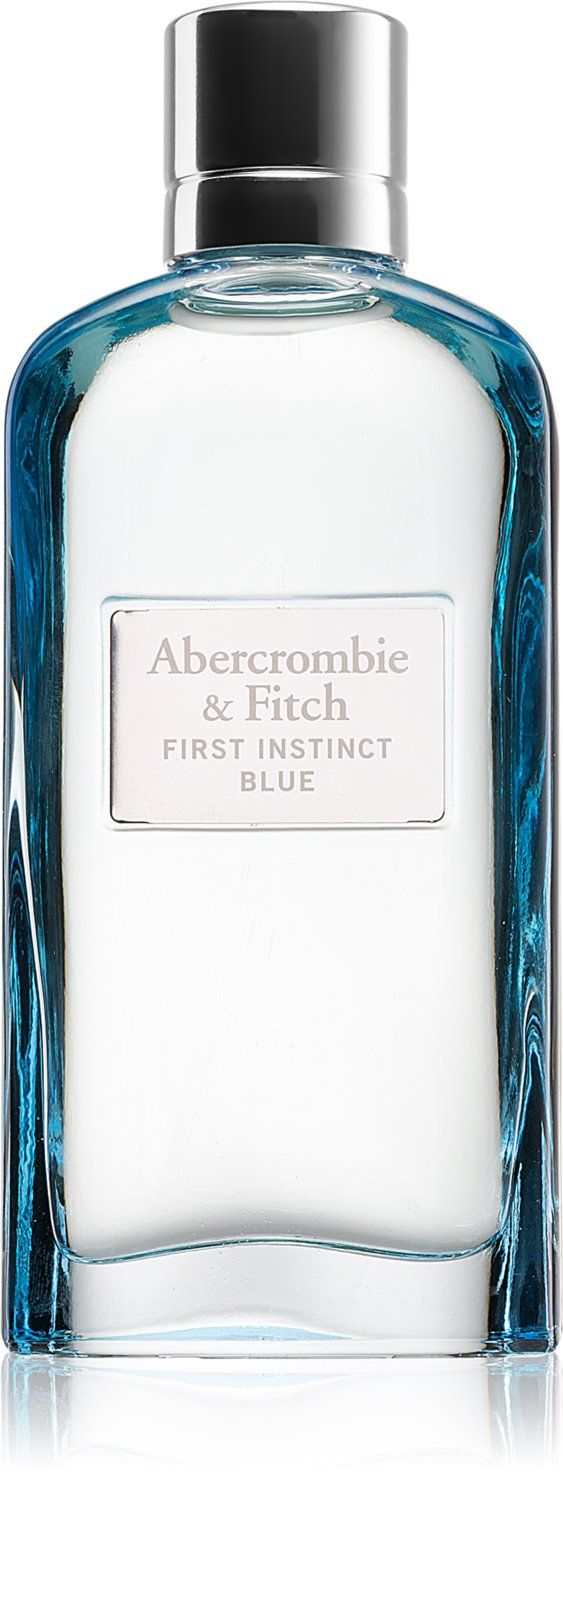 Abercrombie fitch first instinct blue. Abercrombie & Fitch / first Instinct Blue EDP 100 тестер. First Instinct Blue for her Abercrombie & Fitch. Abercrombie Fitch first Instinct Blue 30мл.